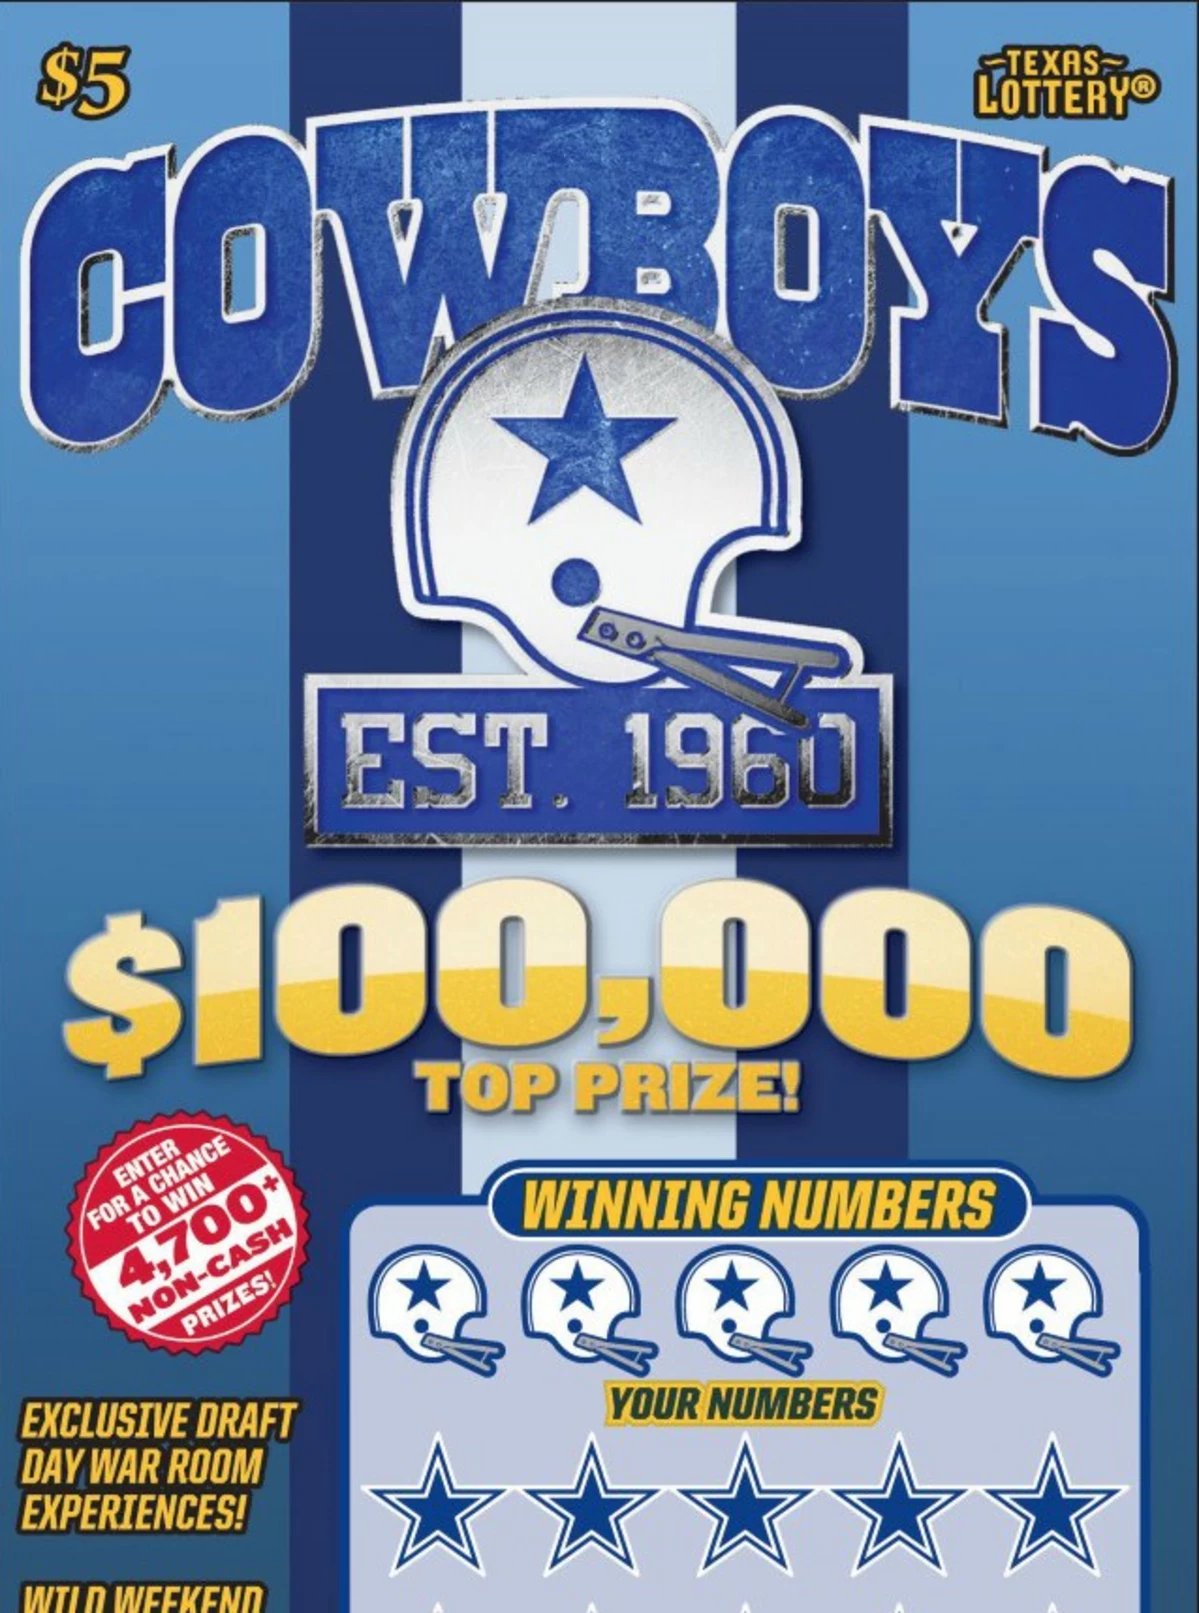 Newest Version Dallas Cowboys ScratchOff Tickets Available Now